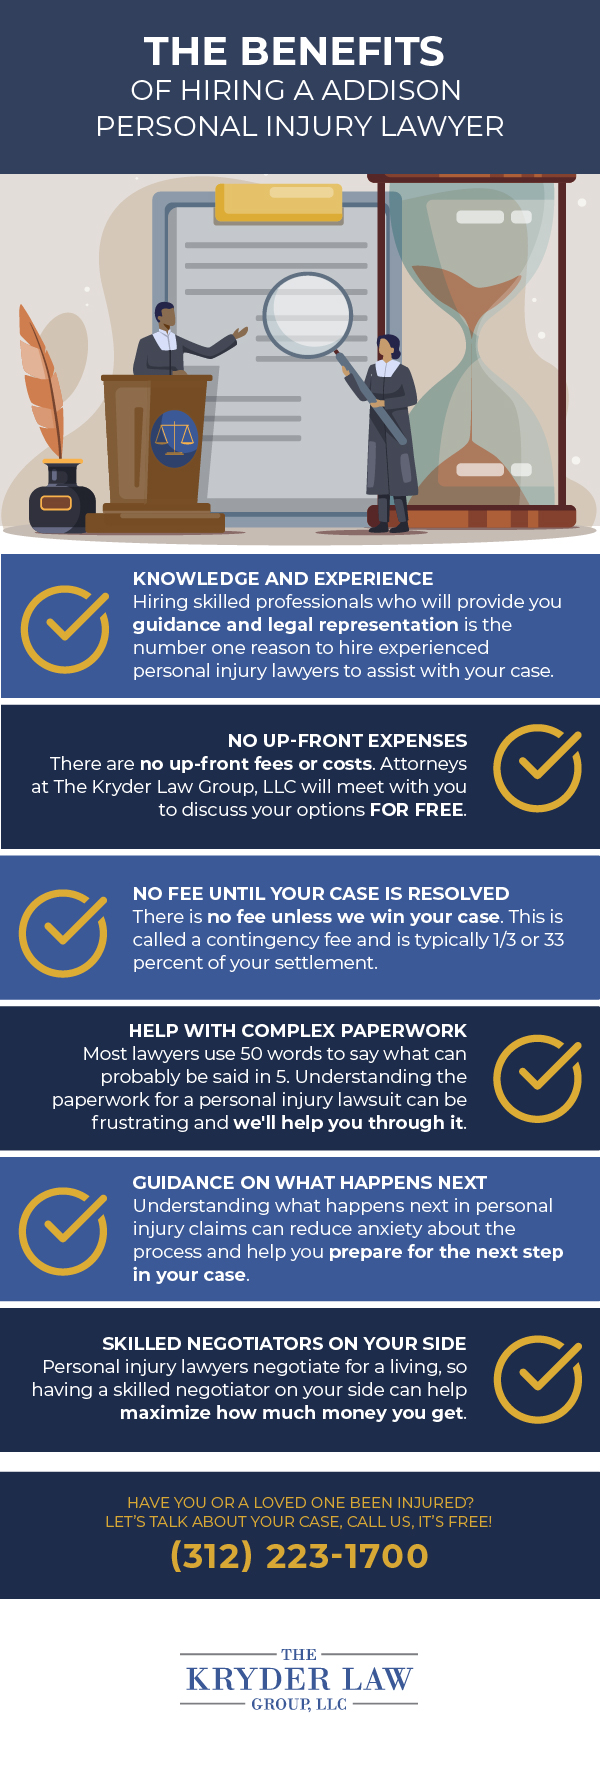 The Benefits of Hiring a Addison Personal Injury Lawyer Infographic